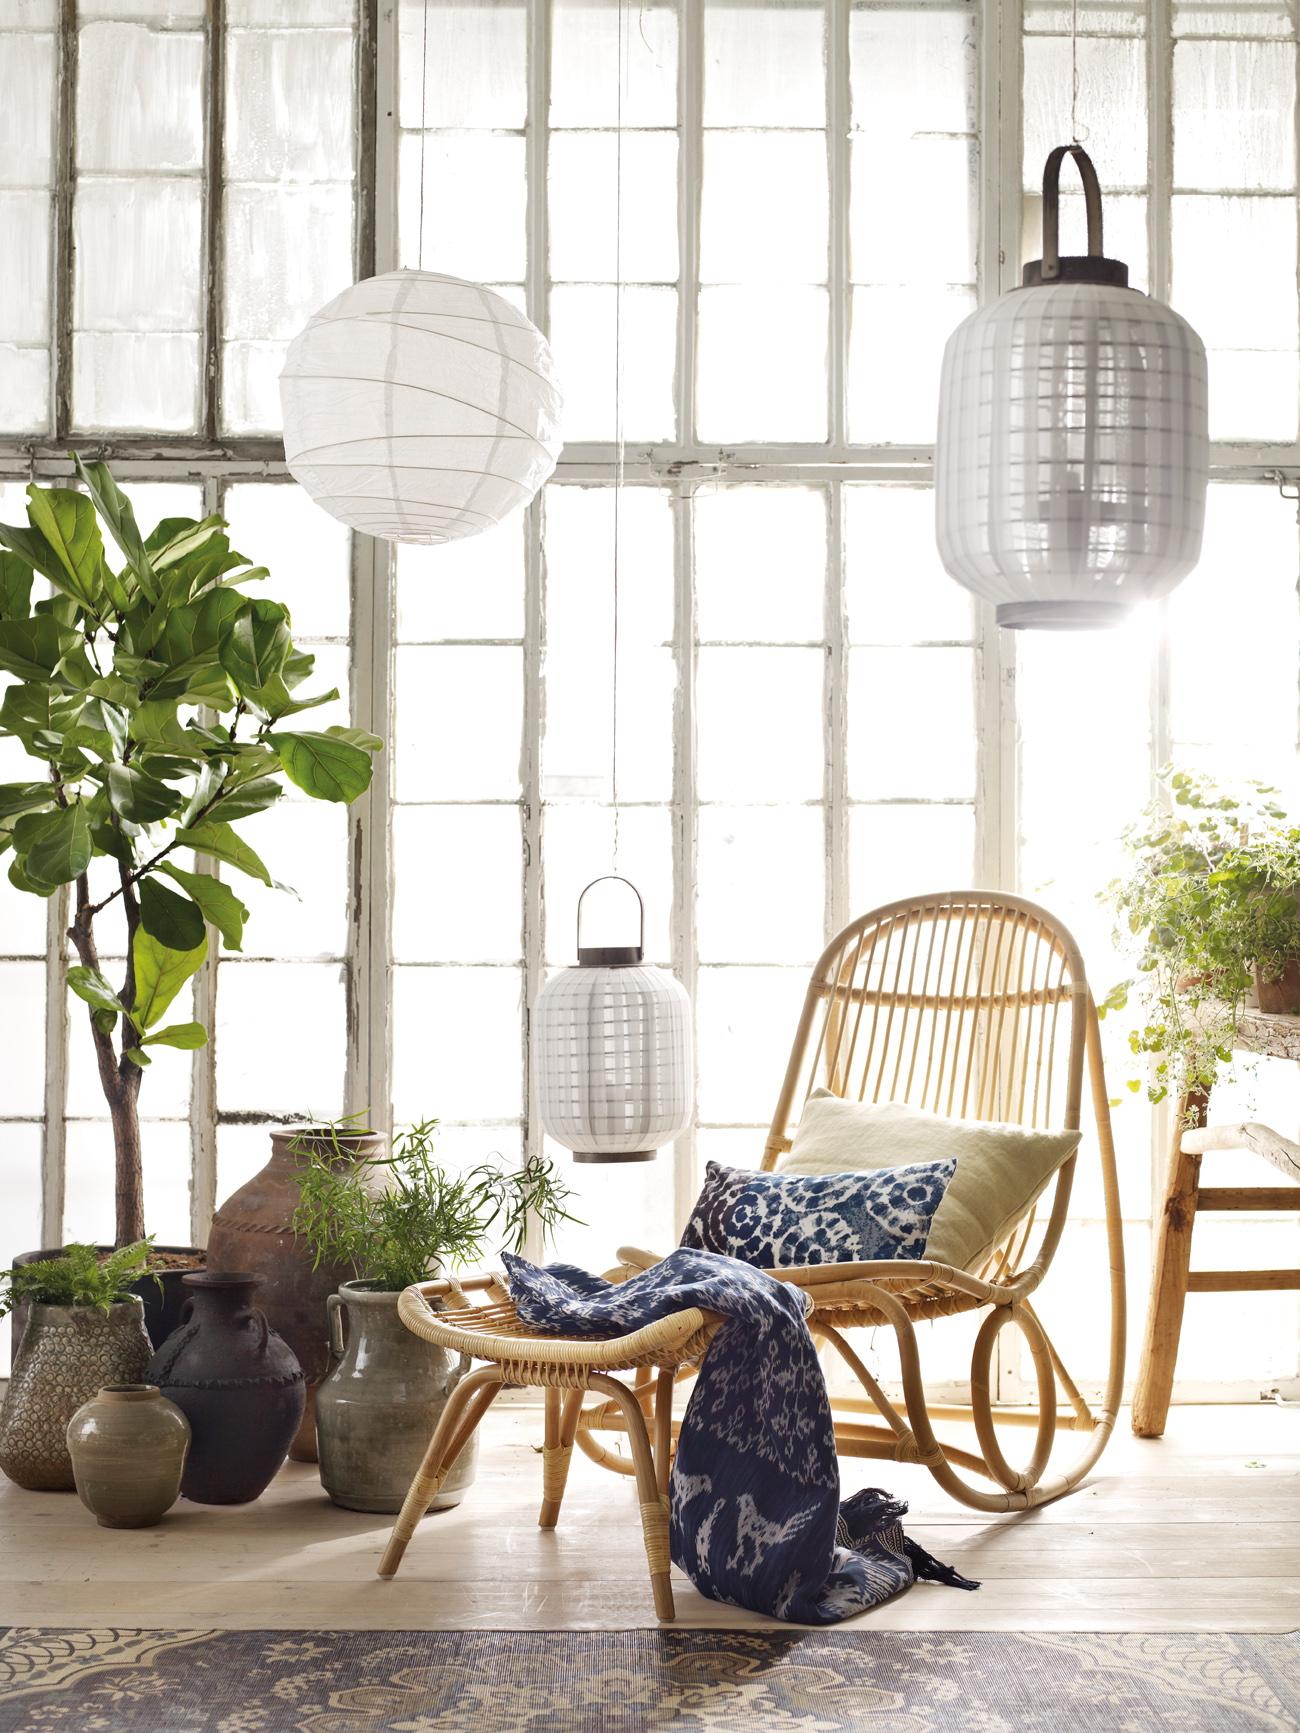 Au Naturel: Turn Your Interiors Into Your Own Personal Greenhouse